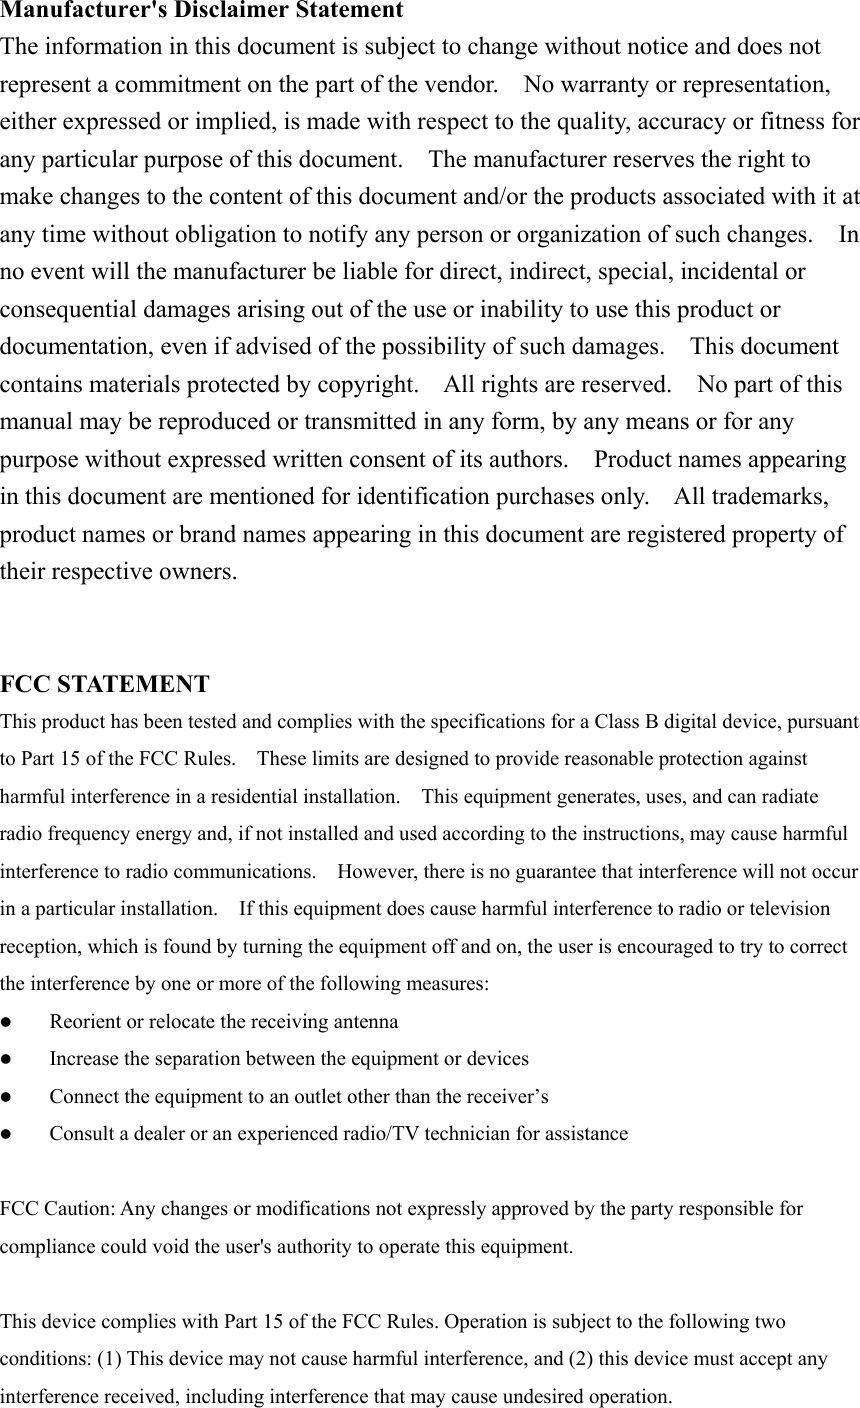 Manufacturer&apos;s Disclaimer StatementThe information in this document is subject to change without notice and does notrepresent a commitment on the part of the vendor.    No warranty or representation,either expressed or implied, is made with respect to the quality, accuracy or fitness forany particular purpose of this document.    The manufacturer reserves the right tomake changes to the content of this document and/or the products associated with it atany time without obligation to notify any person or organization of such changes.    Inno event will the manufacturer be liable for direct, indirect, special, incidental orconsequential damages arising out of the use or inability to use this product ordocumentation, even if advised of the possibility of such damages.    This documentcontains materials protected by copyright.    All rights are reserved.    No part of thismanual may be reproduced or transmitted in any form, by any means or for anypurpose without expressed written consent of its authors.  Product names appearingin this document are mentioned for identification purchases only.    All trademarks,product names or brand names appearing in this document are registered property oftheir respective owners.FCC STATEMENTThis product has been tested and complies with the specifications for a Class B digital device, pursuantto Part 15 of the FCC Rules.    These limits are designed to provide reasonable protection againstharmful interference in a residential installation.    This equipment generates, uses, and can radiateradio frequency energy and, if not installed and used according to the instructions, may cause harmfulinterference to radio communications.    However, there is no guarantee that interference will not occurin a particular installation.    If this equipment does cause harmful interference to radio or televisionreception, which is found by turning the equipment off and on, the user is encouraged to try to correctthe interference by one or more of the following measures:z Reorient or relocate the receiving antennaz Increase the separation between the equipment or devicesz Connect the equipment to an outlet other than the receiver’sz Consult a dealer or an experienced radio/TV technician for assistanceFCC Caution: Any changes or modifications not expressly approved by the party responsible forcompliance could void the user&apos;s authority to operate this equipment. This device complies with Part 15 of the FCC Rules. Operation is subject to the following twoconditions: (1) This device may not cause harmful interference, and (2) this device must accept anyinterference received, including interference that may cause undesired operation.